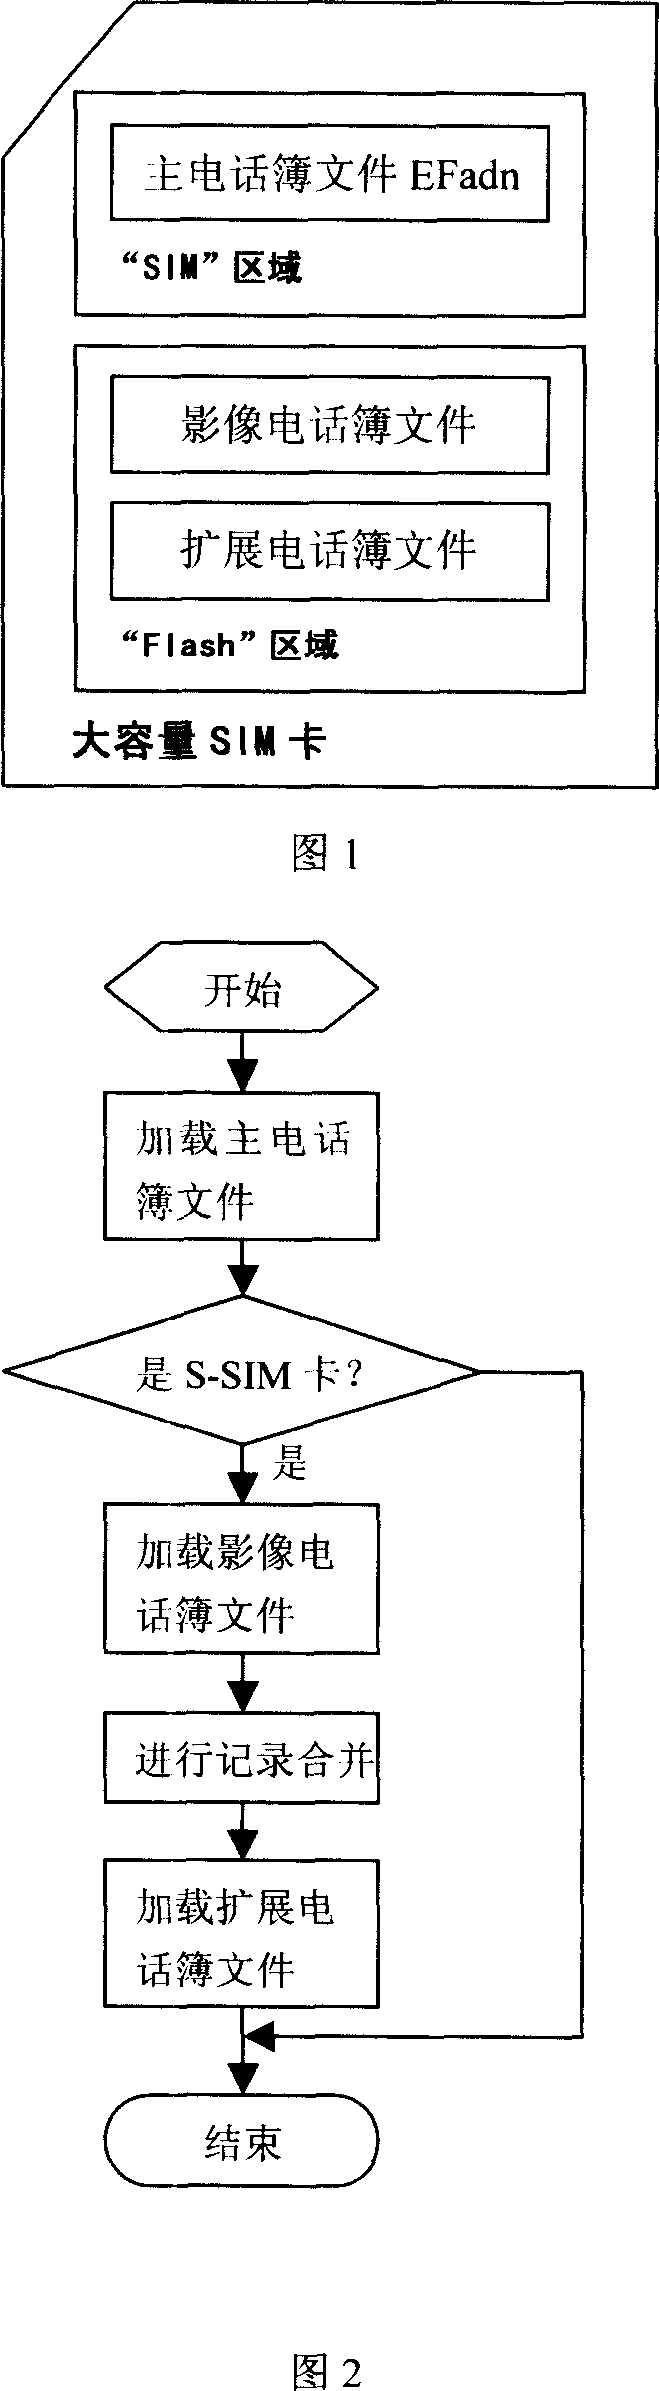 The method of the cooperative use of the data structure of the phone directory in the large-capacity SIM card